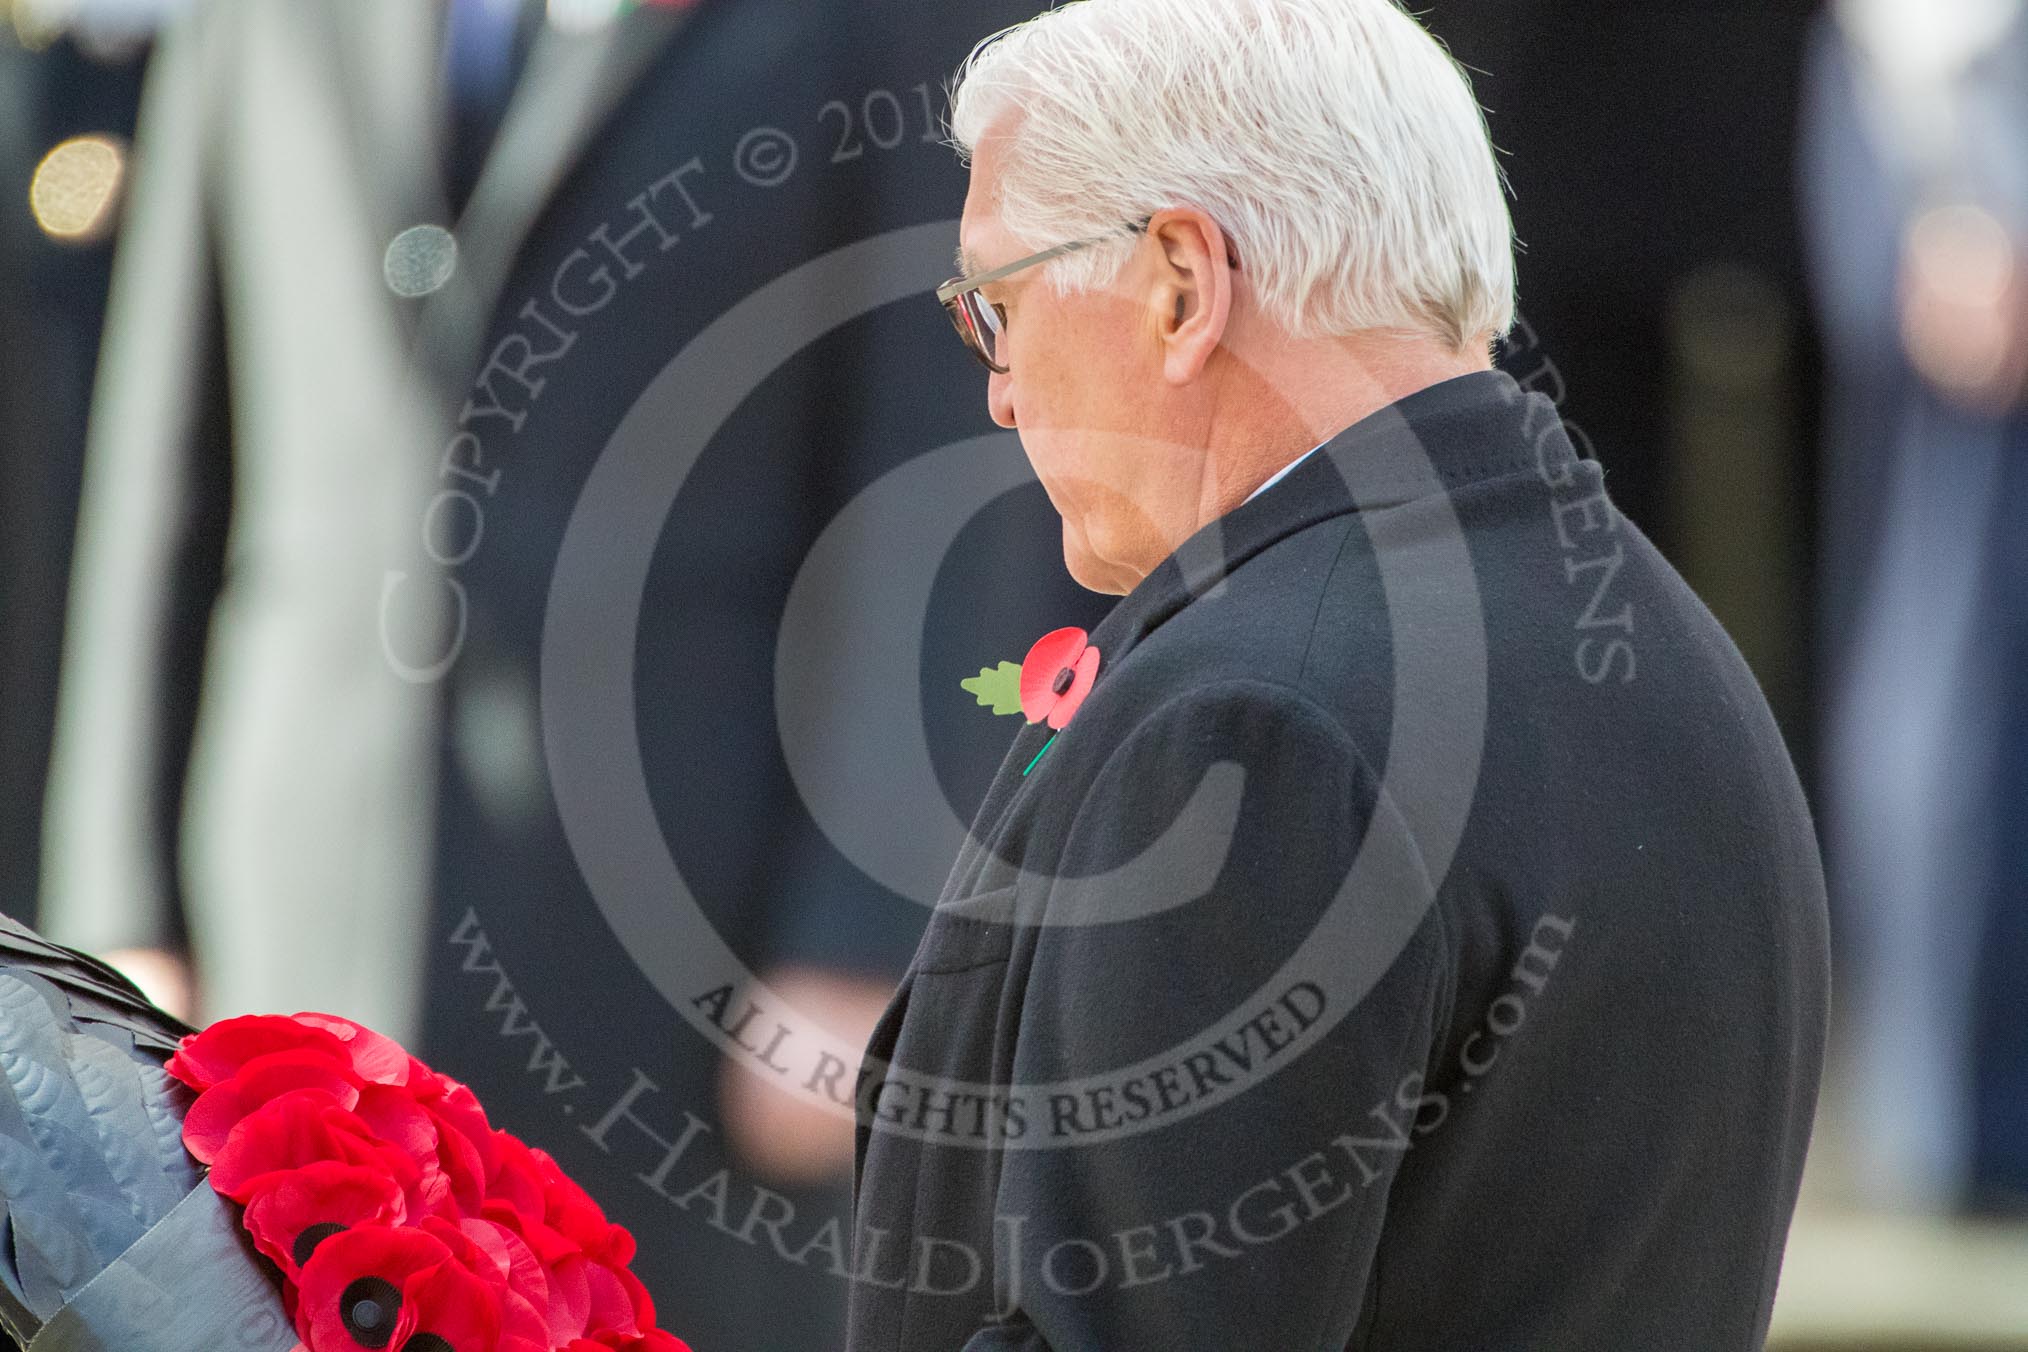 HE The President of the Federal Republic of Germany, Frank-Walter Steinmeier  during the Remembrance Sunday Cenotaph Ceremony 2018 at Horse Guards Parade, Westminster, London, 11 November 2018, 11:04.